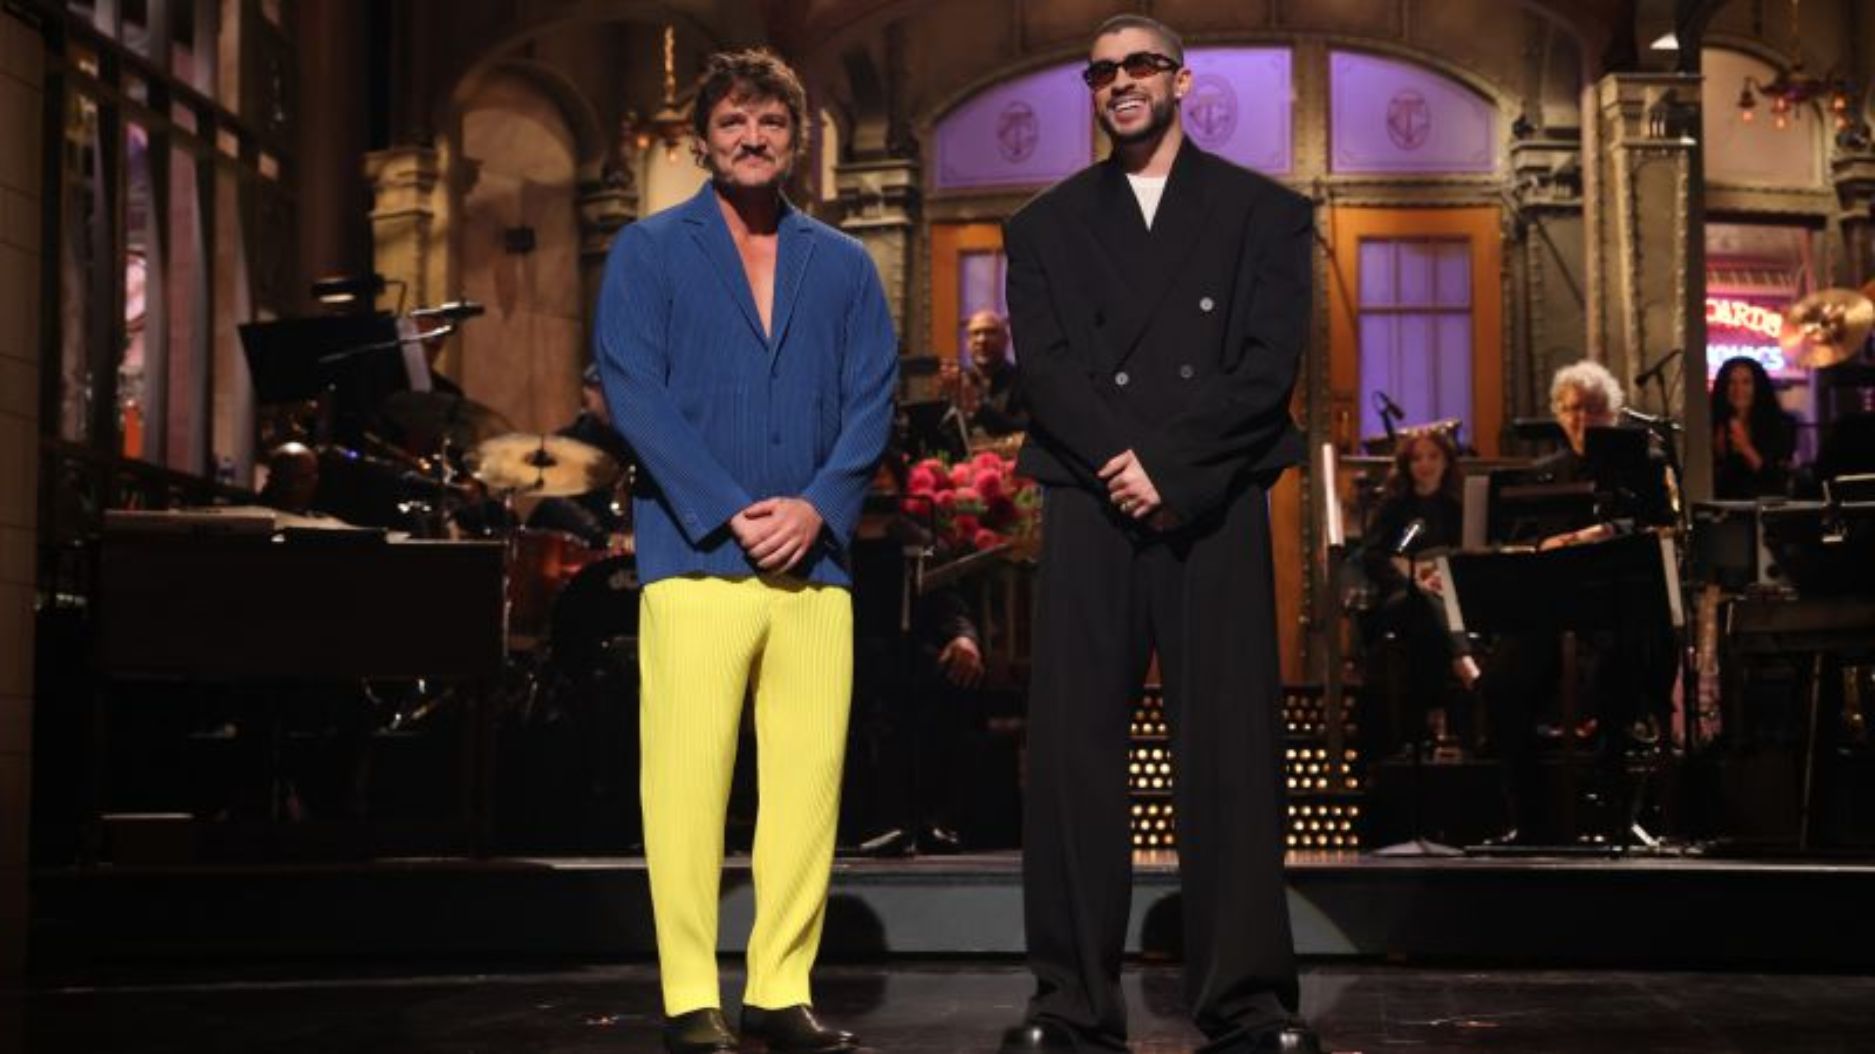 Pedro Pascal appears on “SNL” to help Bad Bunny with his monologue